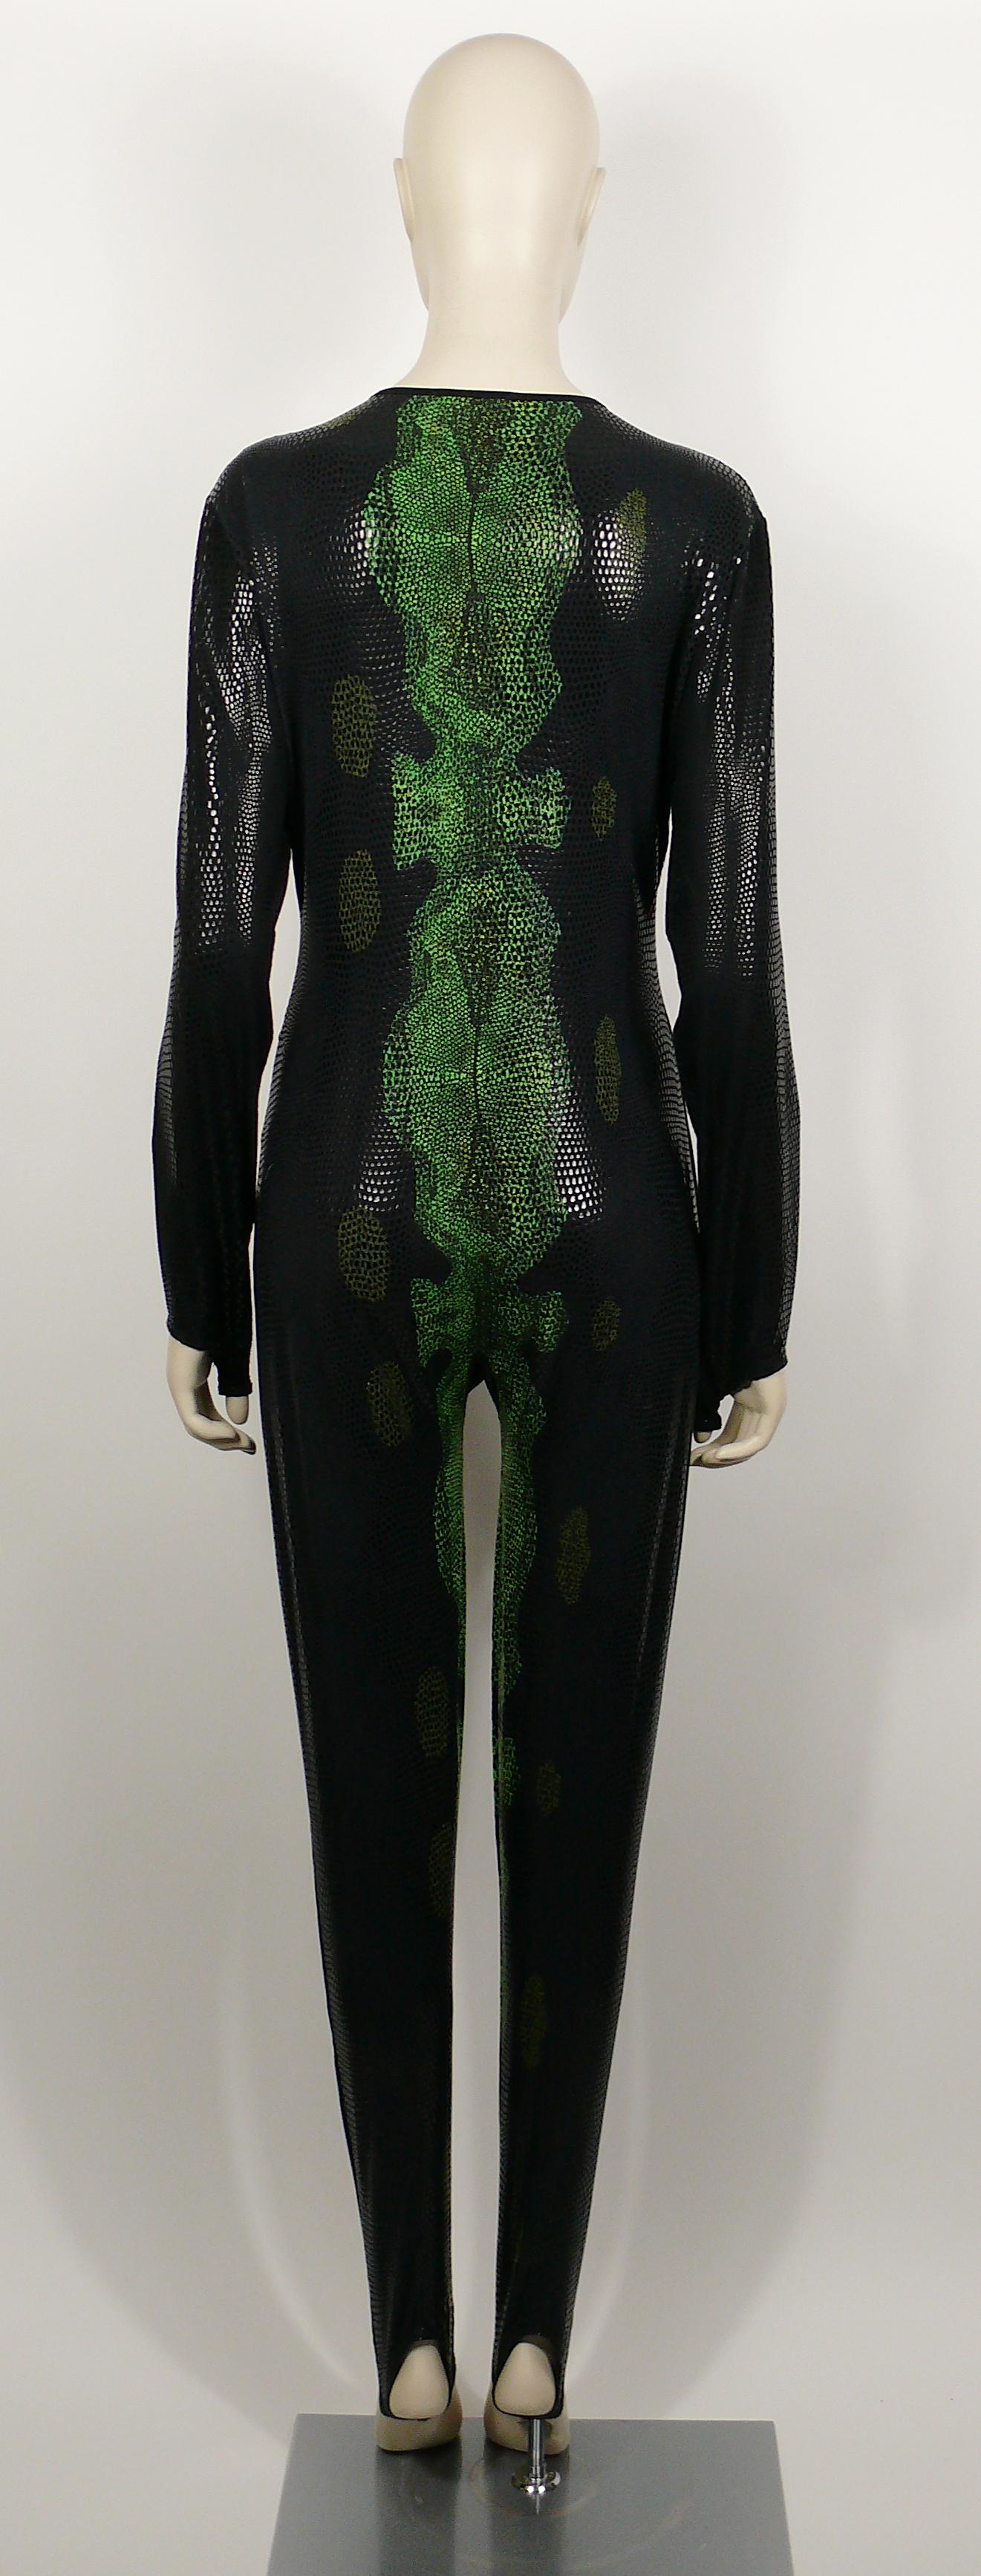 Thierry Mugler Vintage Rare 1998 Back and Green Reptile Skin Jumpsuit Size L 2